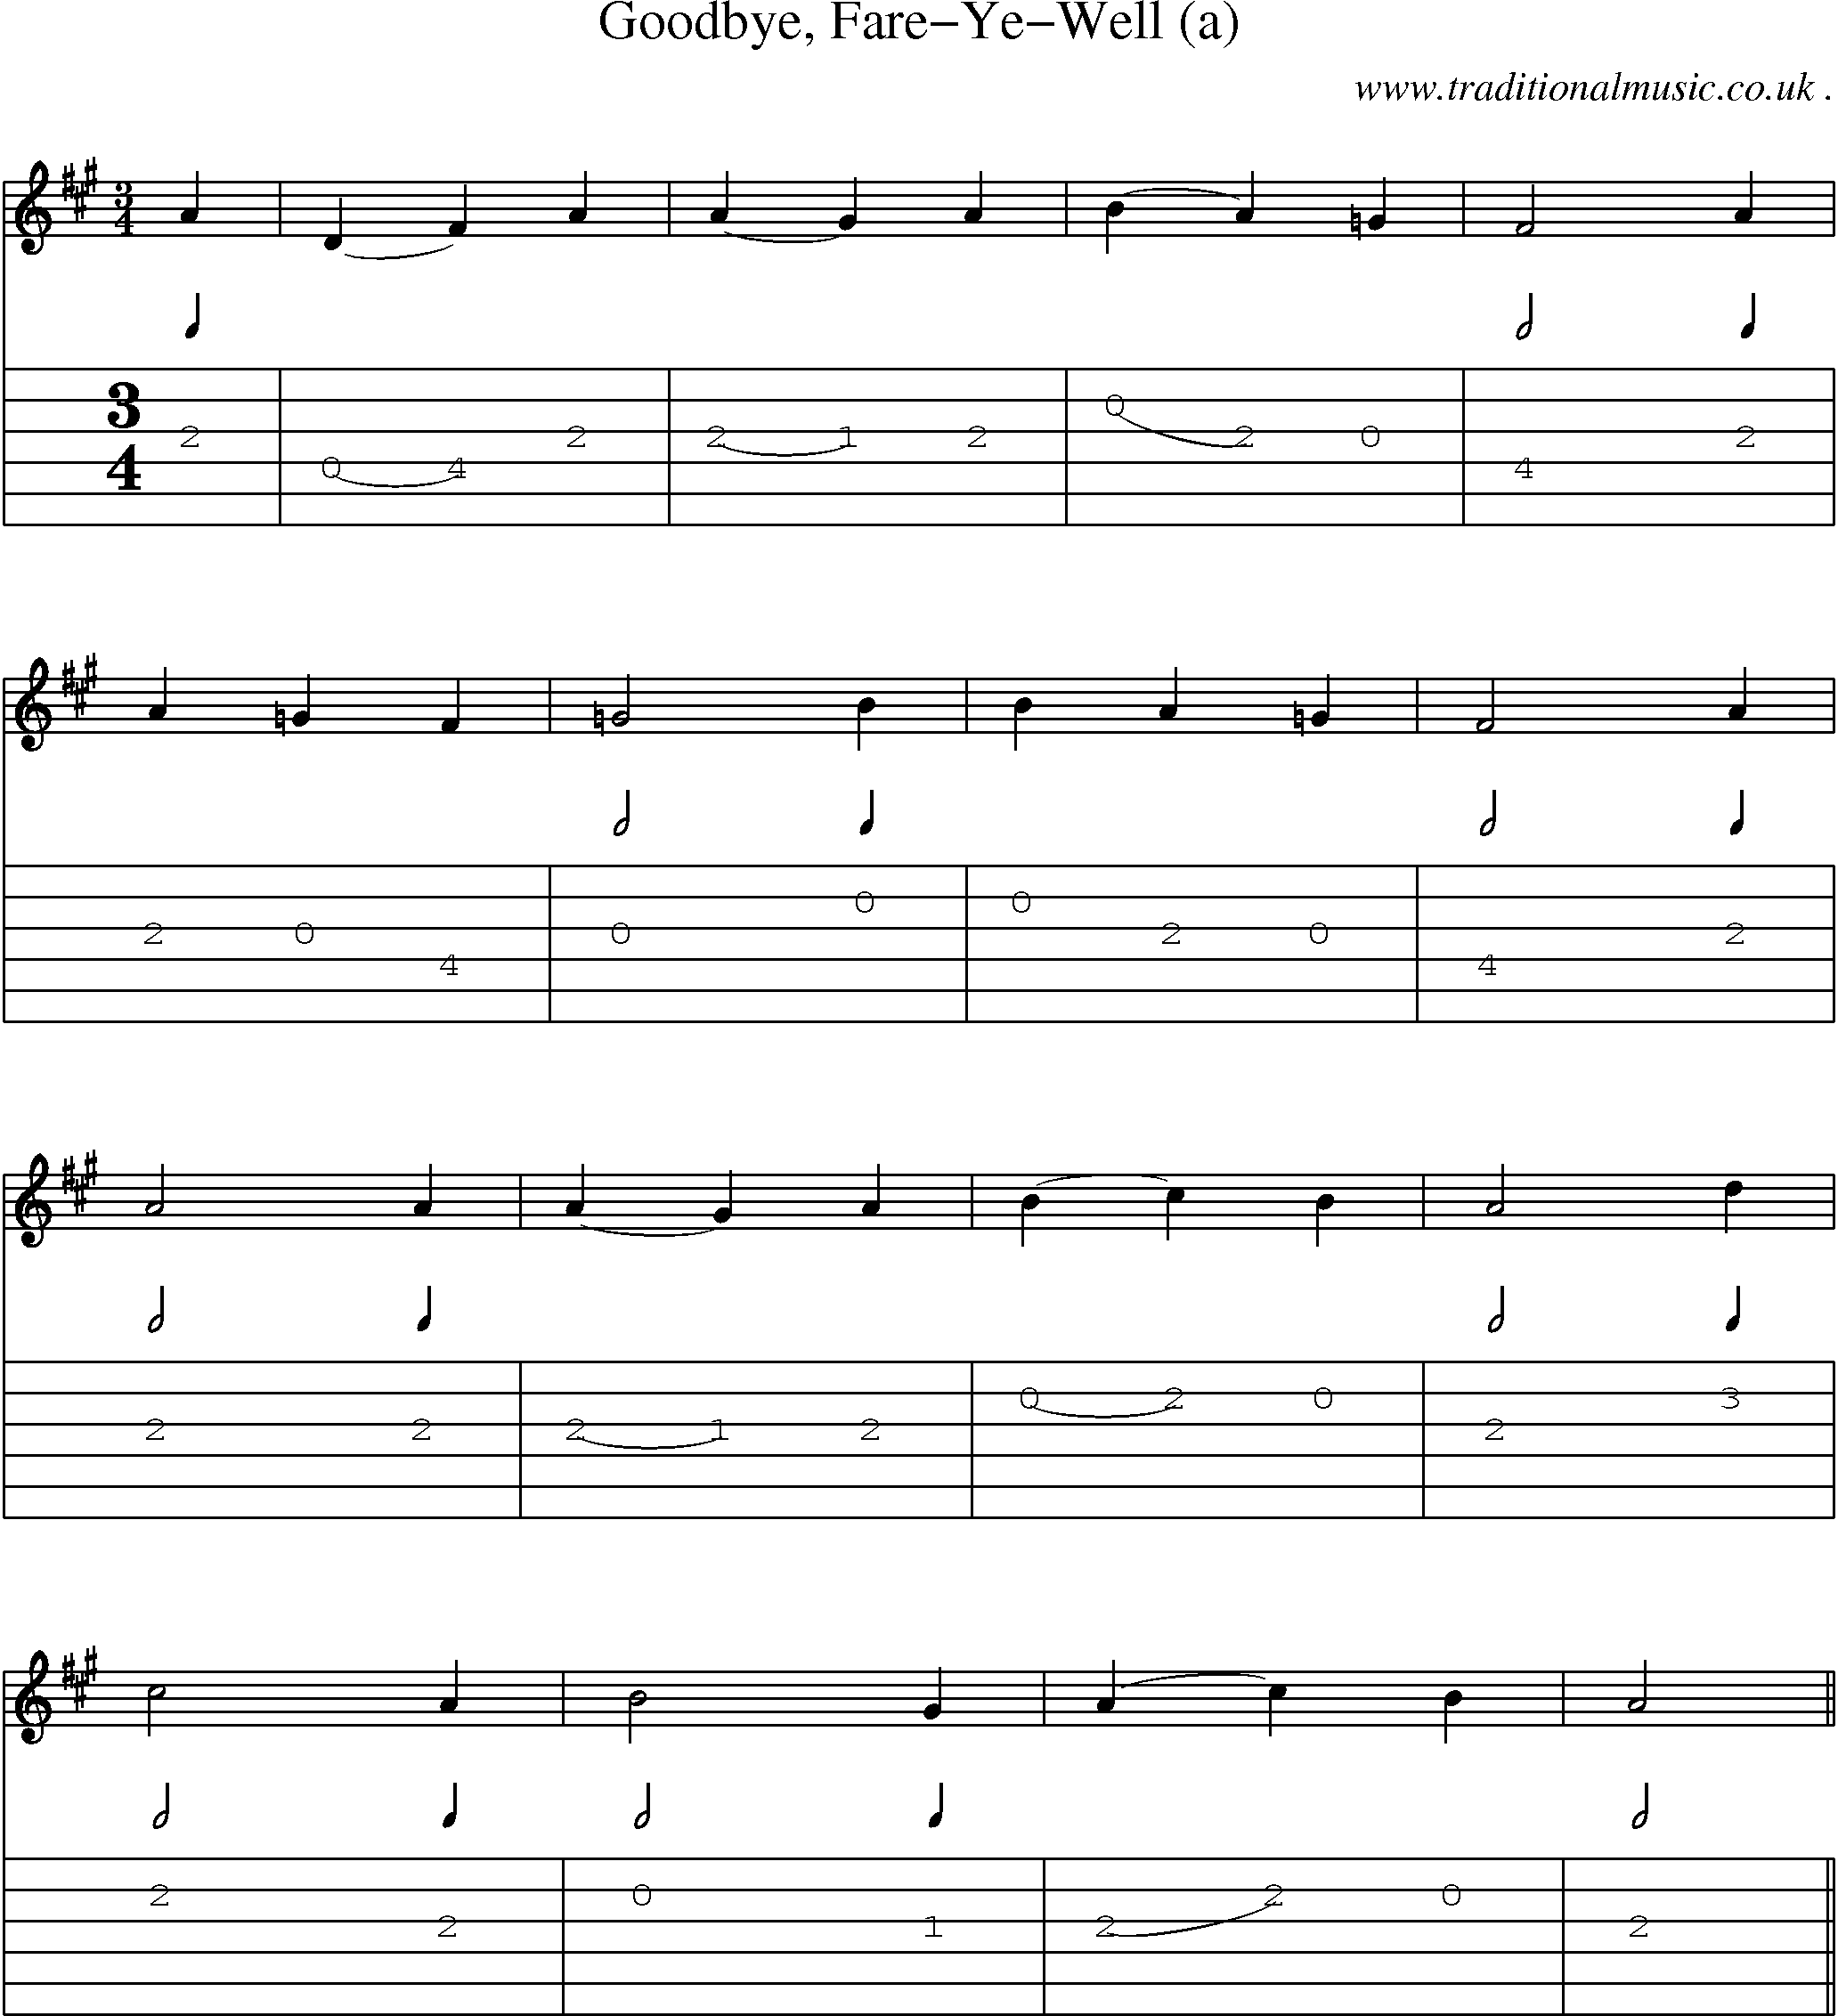 Sheet-Music and Guitar Tabs for Goodbye Fare-ye-well (a)